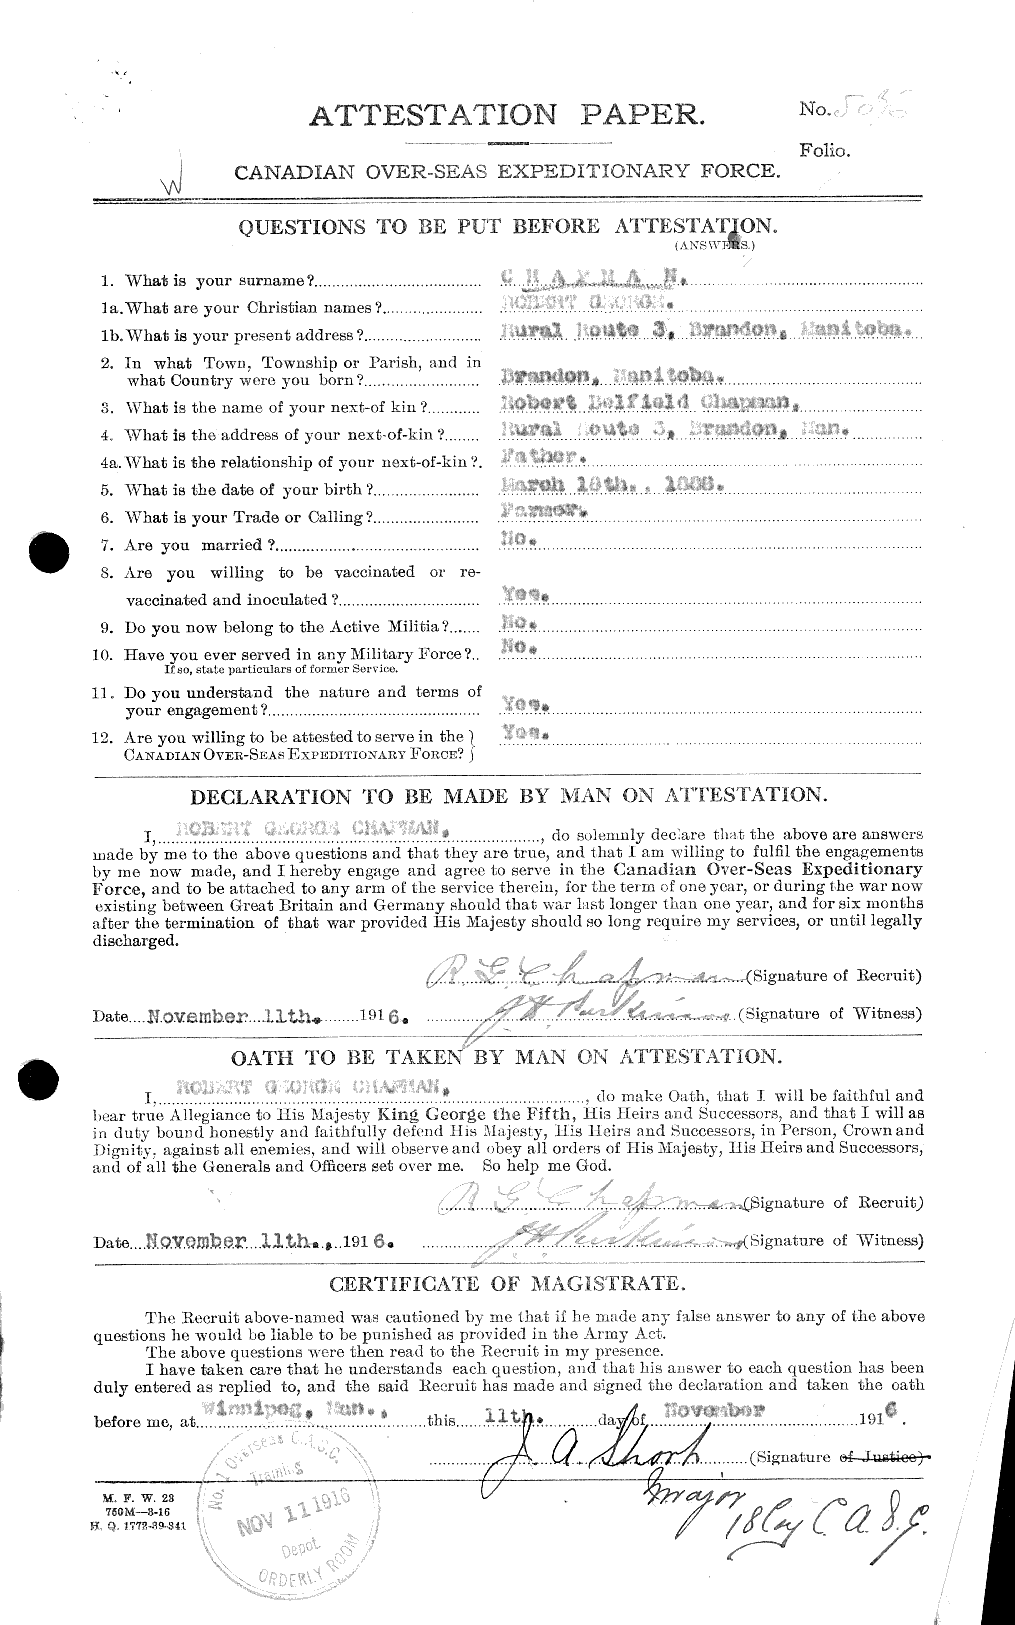 Personnel Records of the First World War - CEF 014800a